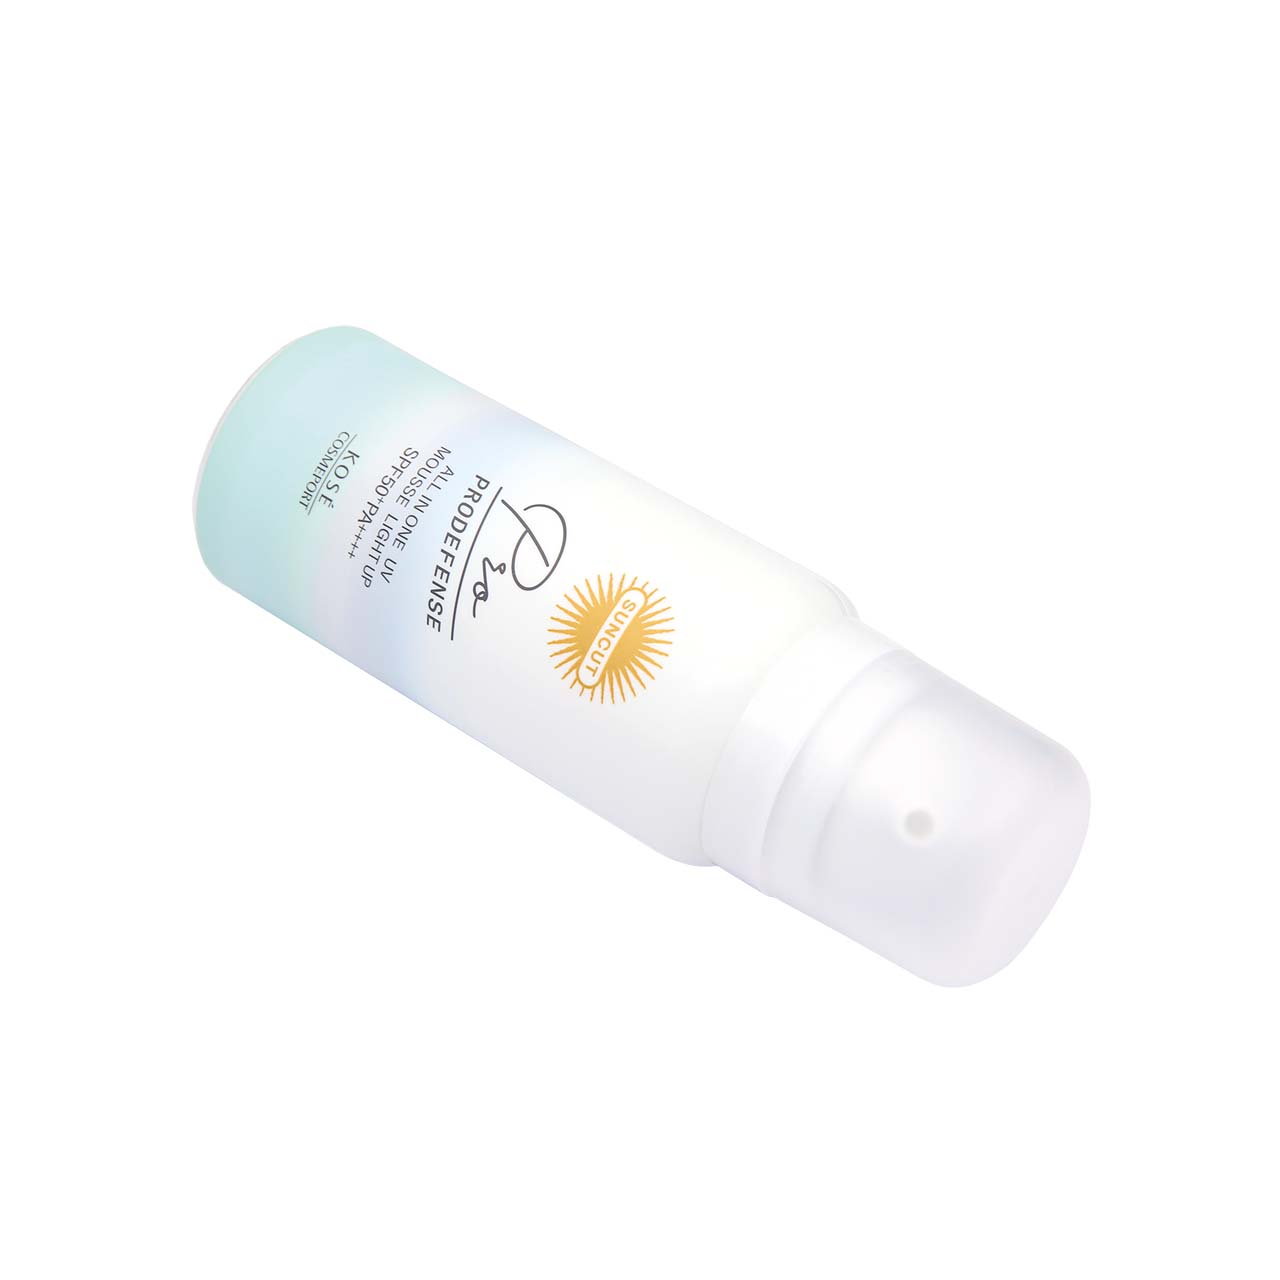 Kose Cosmeport Suncut Prodefense All In One Mousse SPF50+ PA++++ 60g | Sasa Global eShop